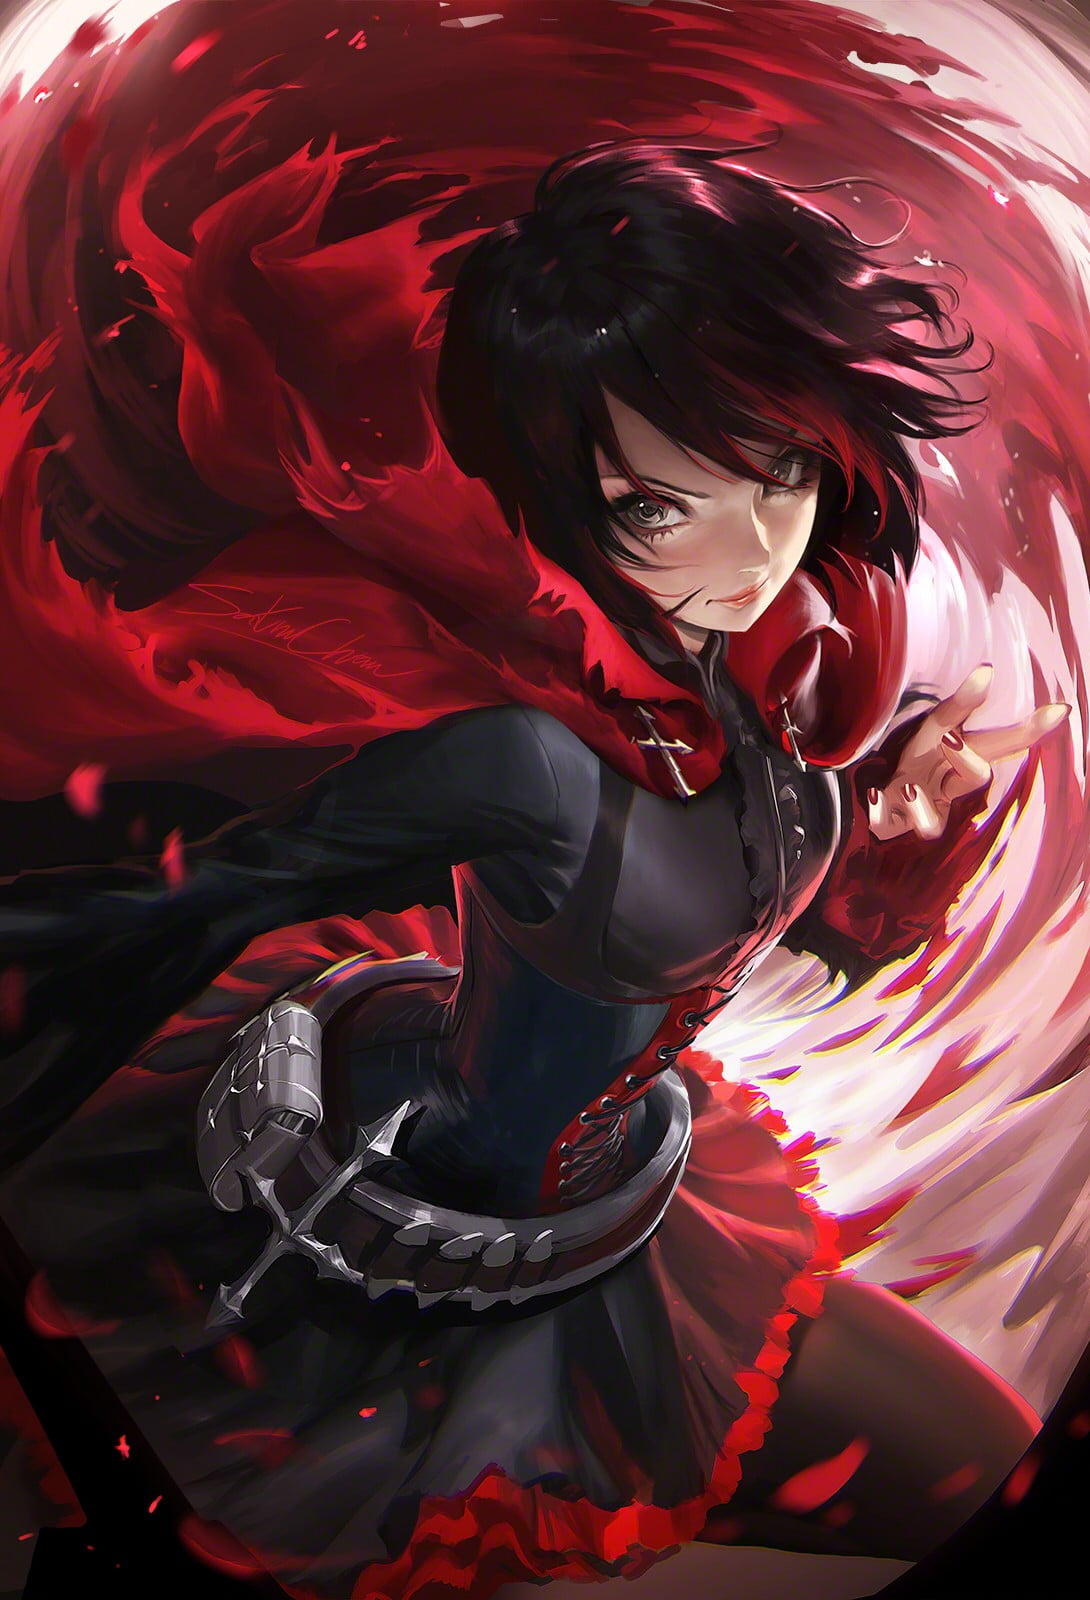 HD wallpaper: RWBY, anime, Ruby Rose (character), text, red, representation  | Wallpaper Flare